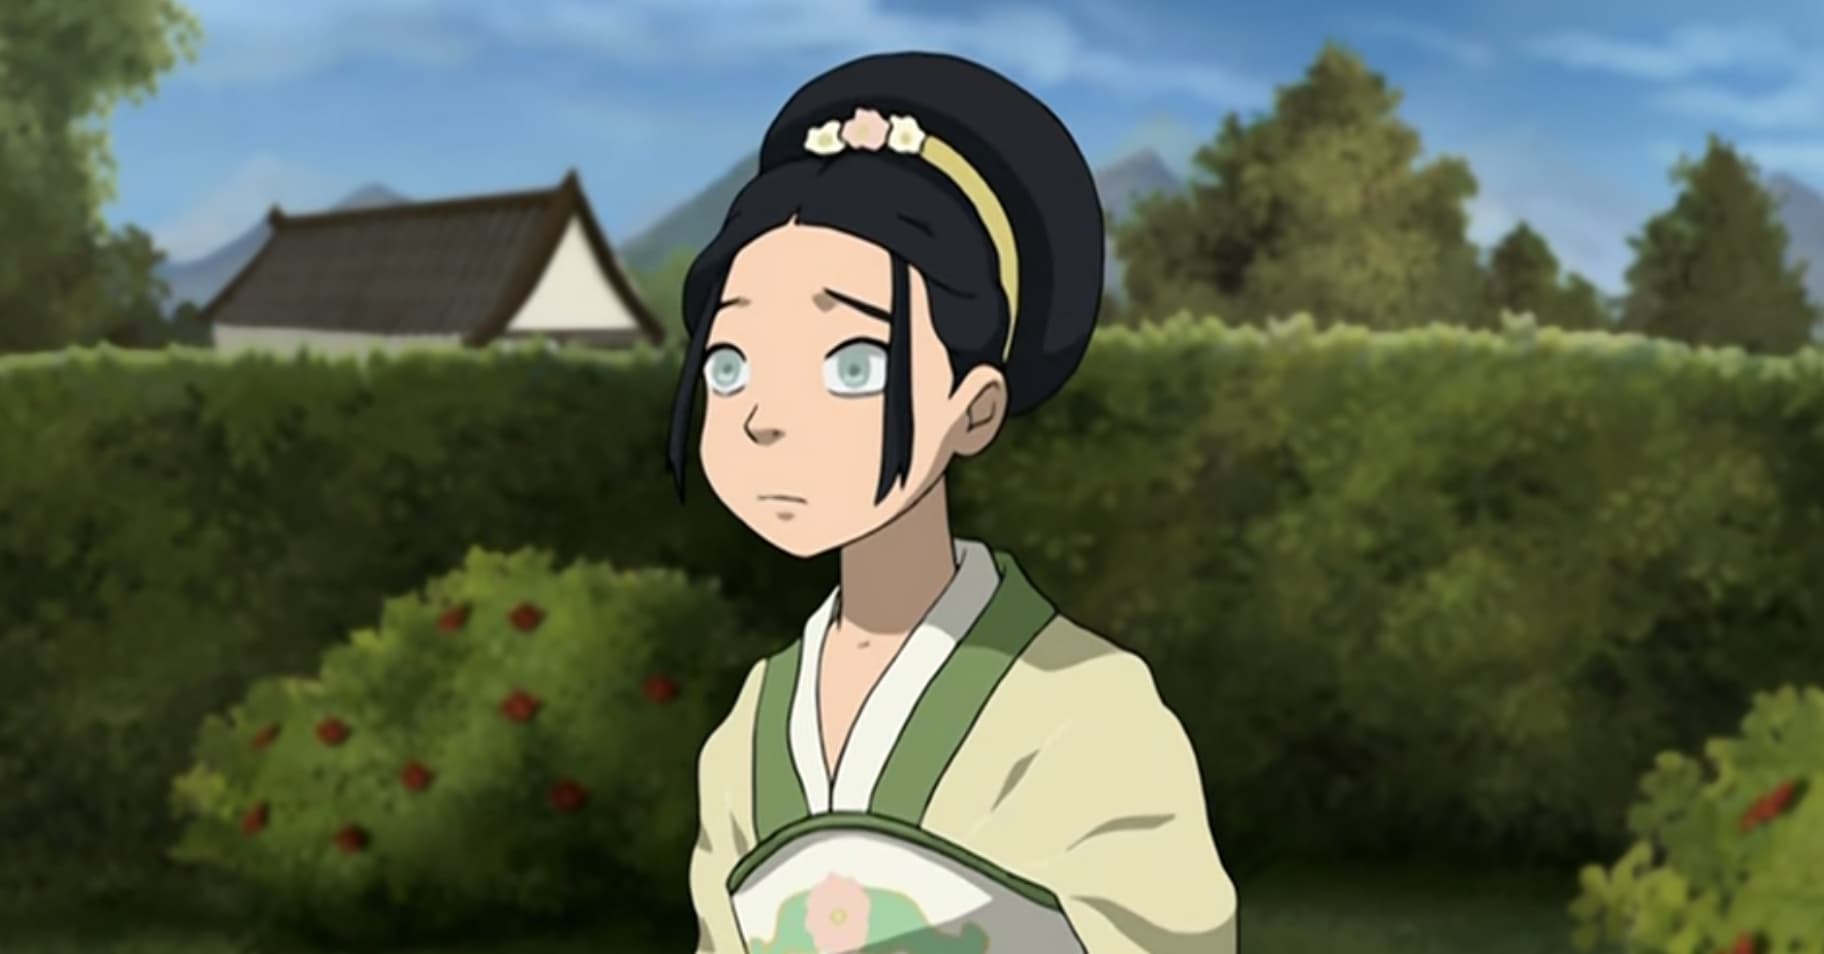 A young Toph Beifong dressed in formal garb